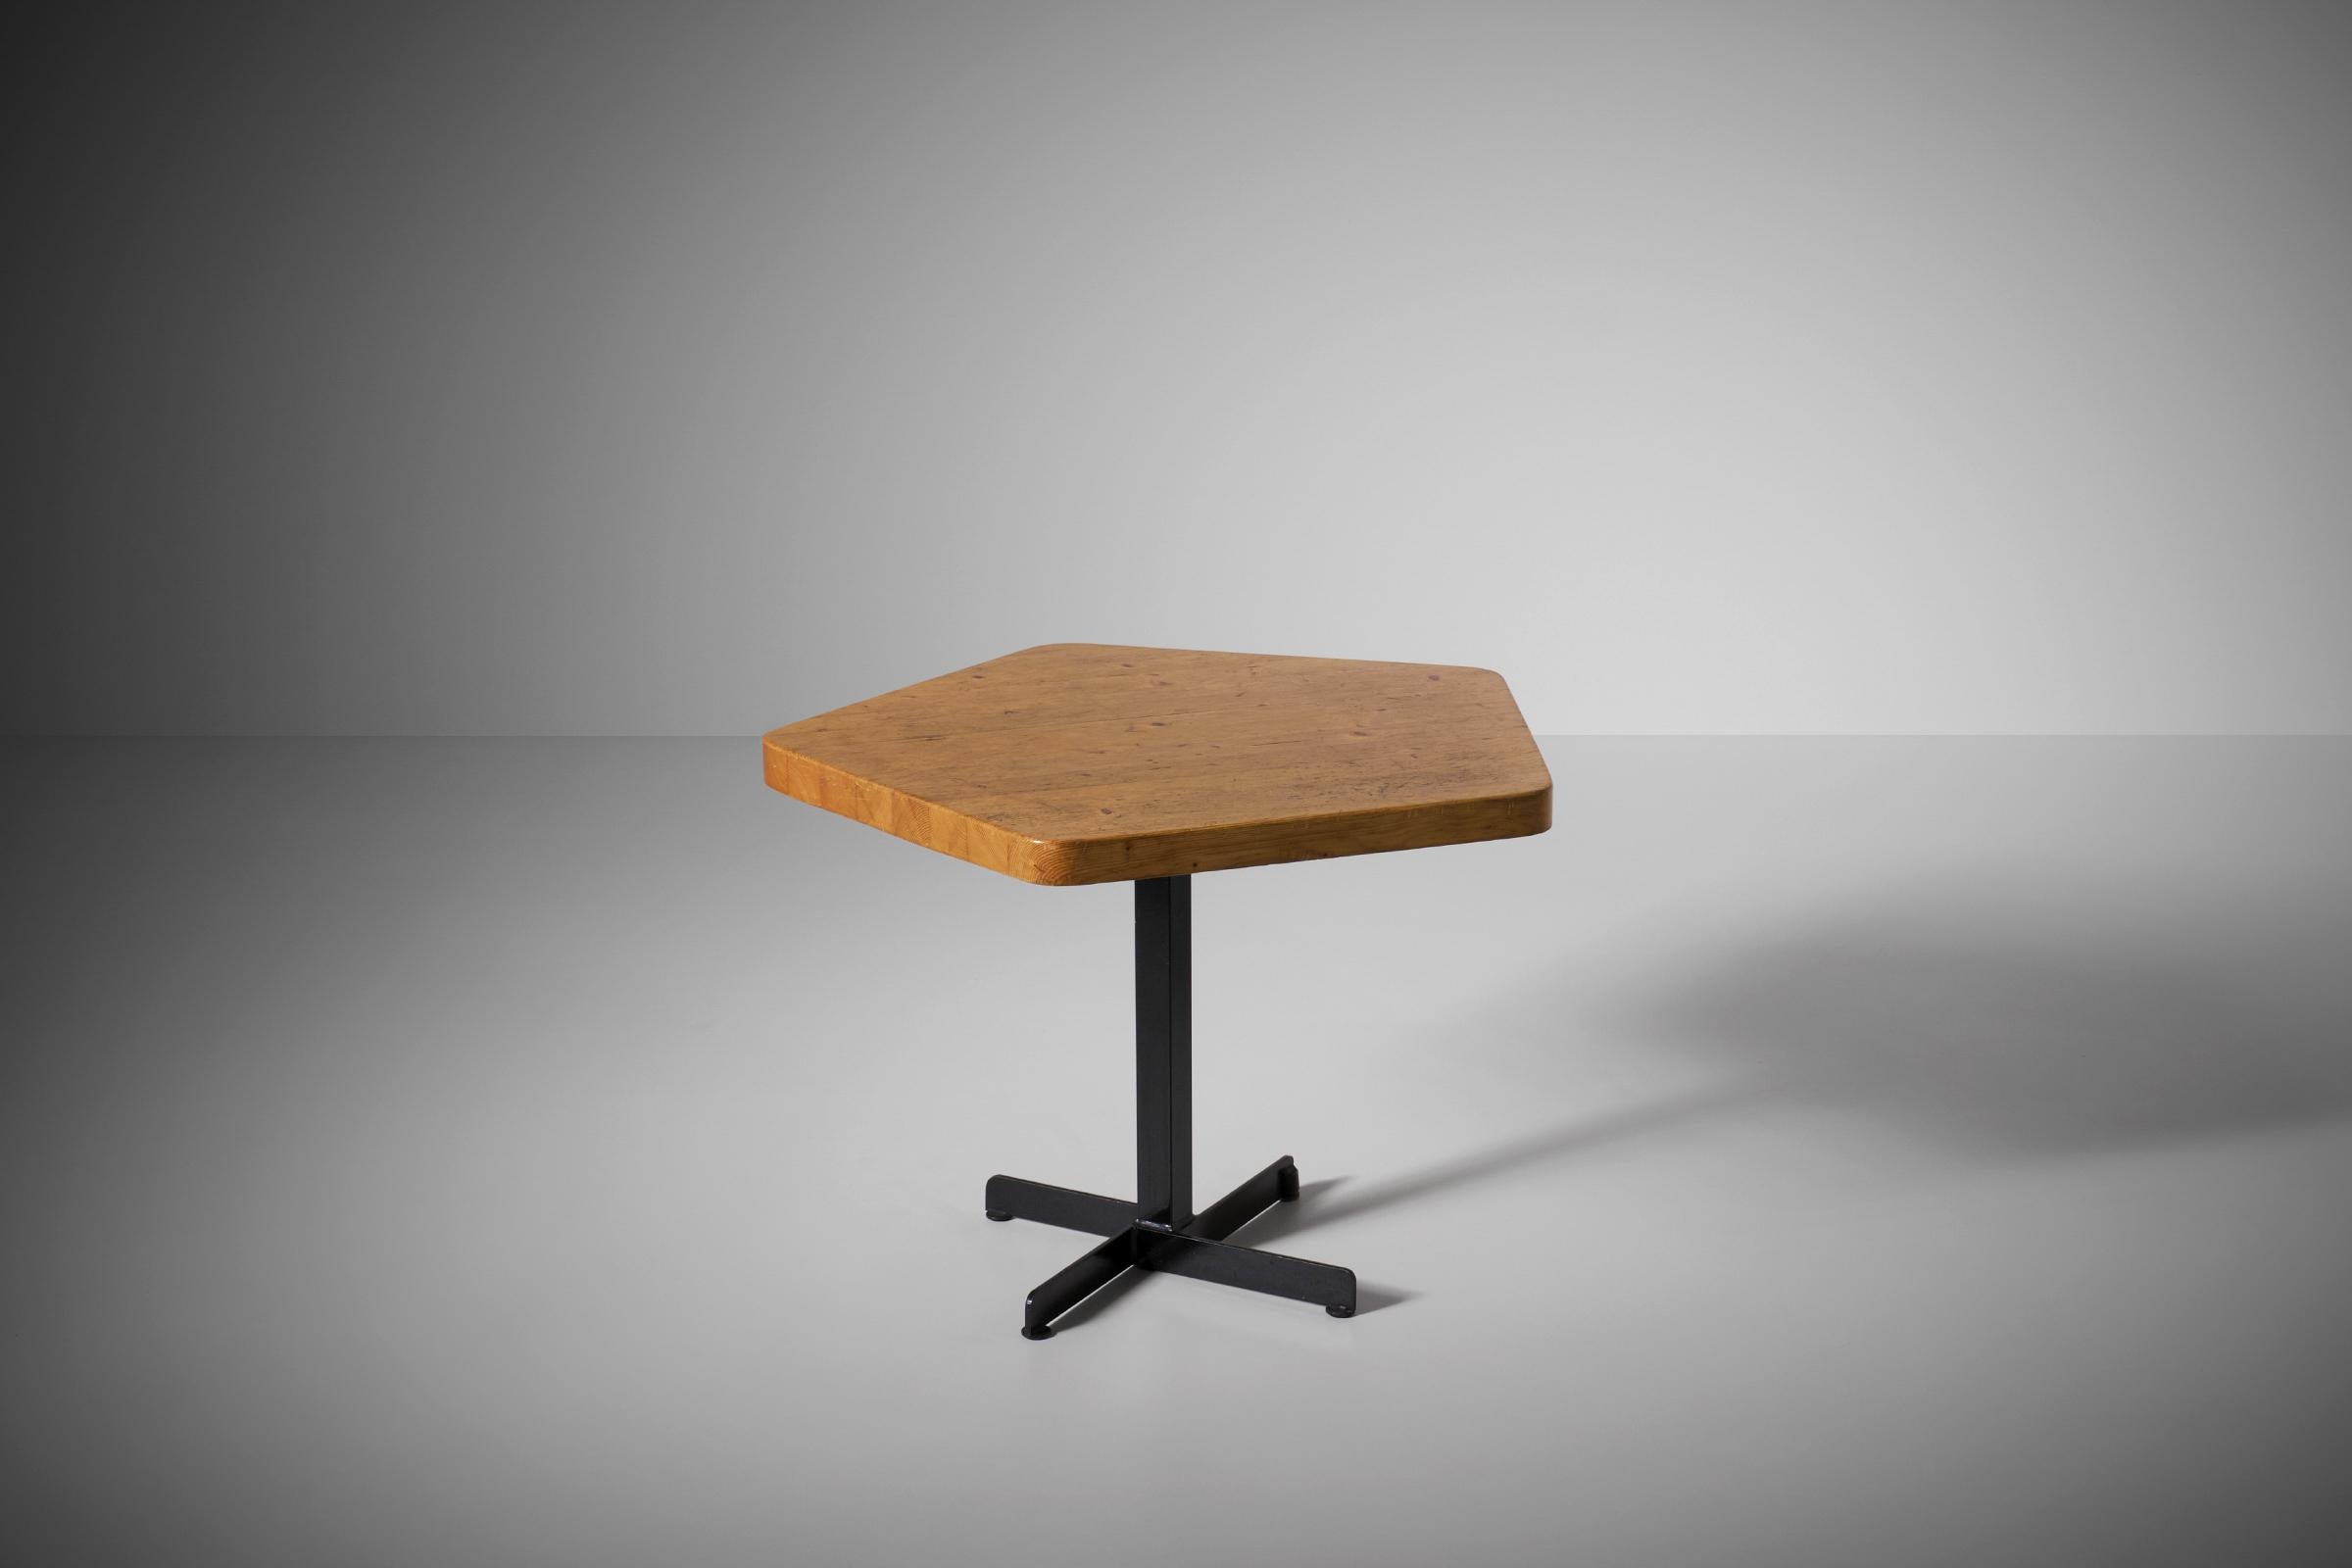 Pentagonal table designed by Charlotte Perriand for the French Ski Resort ‘Les Arcs’, France 1960s. The pentagon shaped top is constructed out of solid Pine slats and shows a nice exposed grain and patina. The top rests on a black lacquered steel